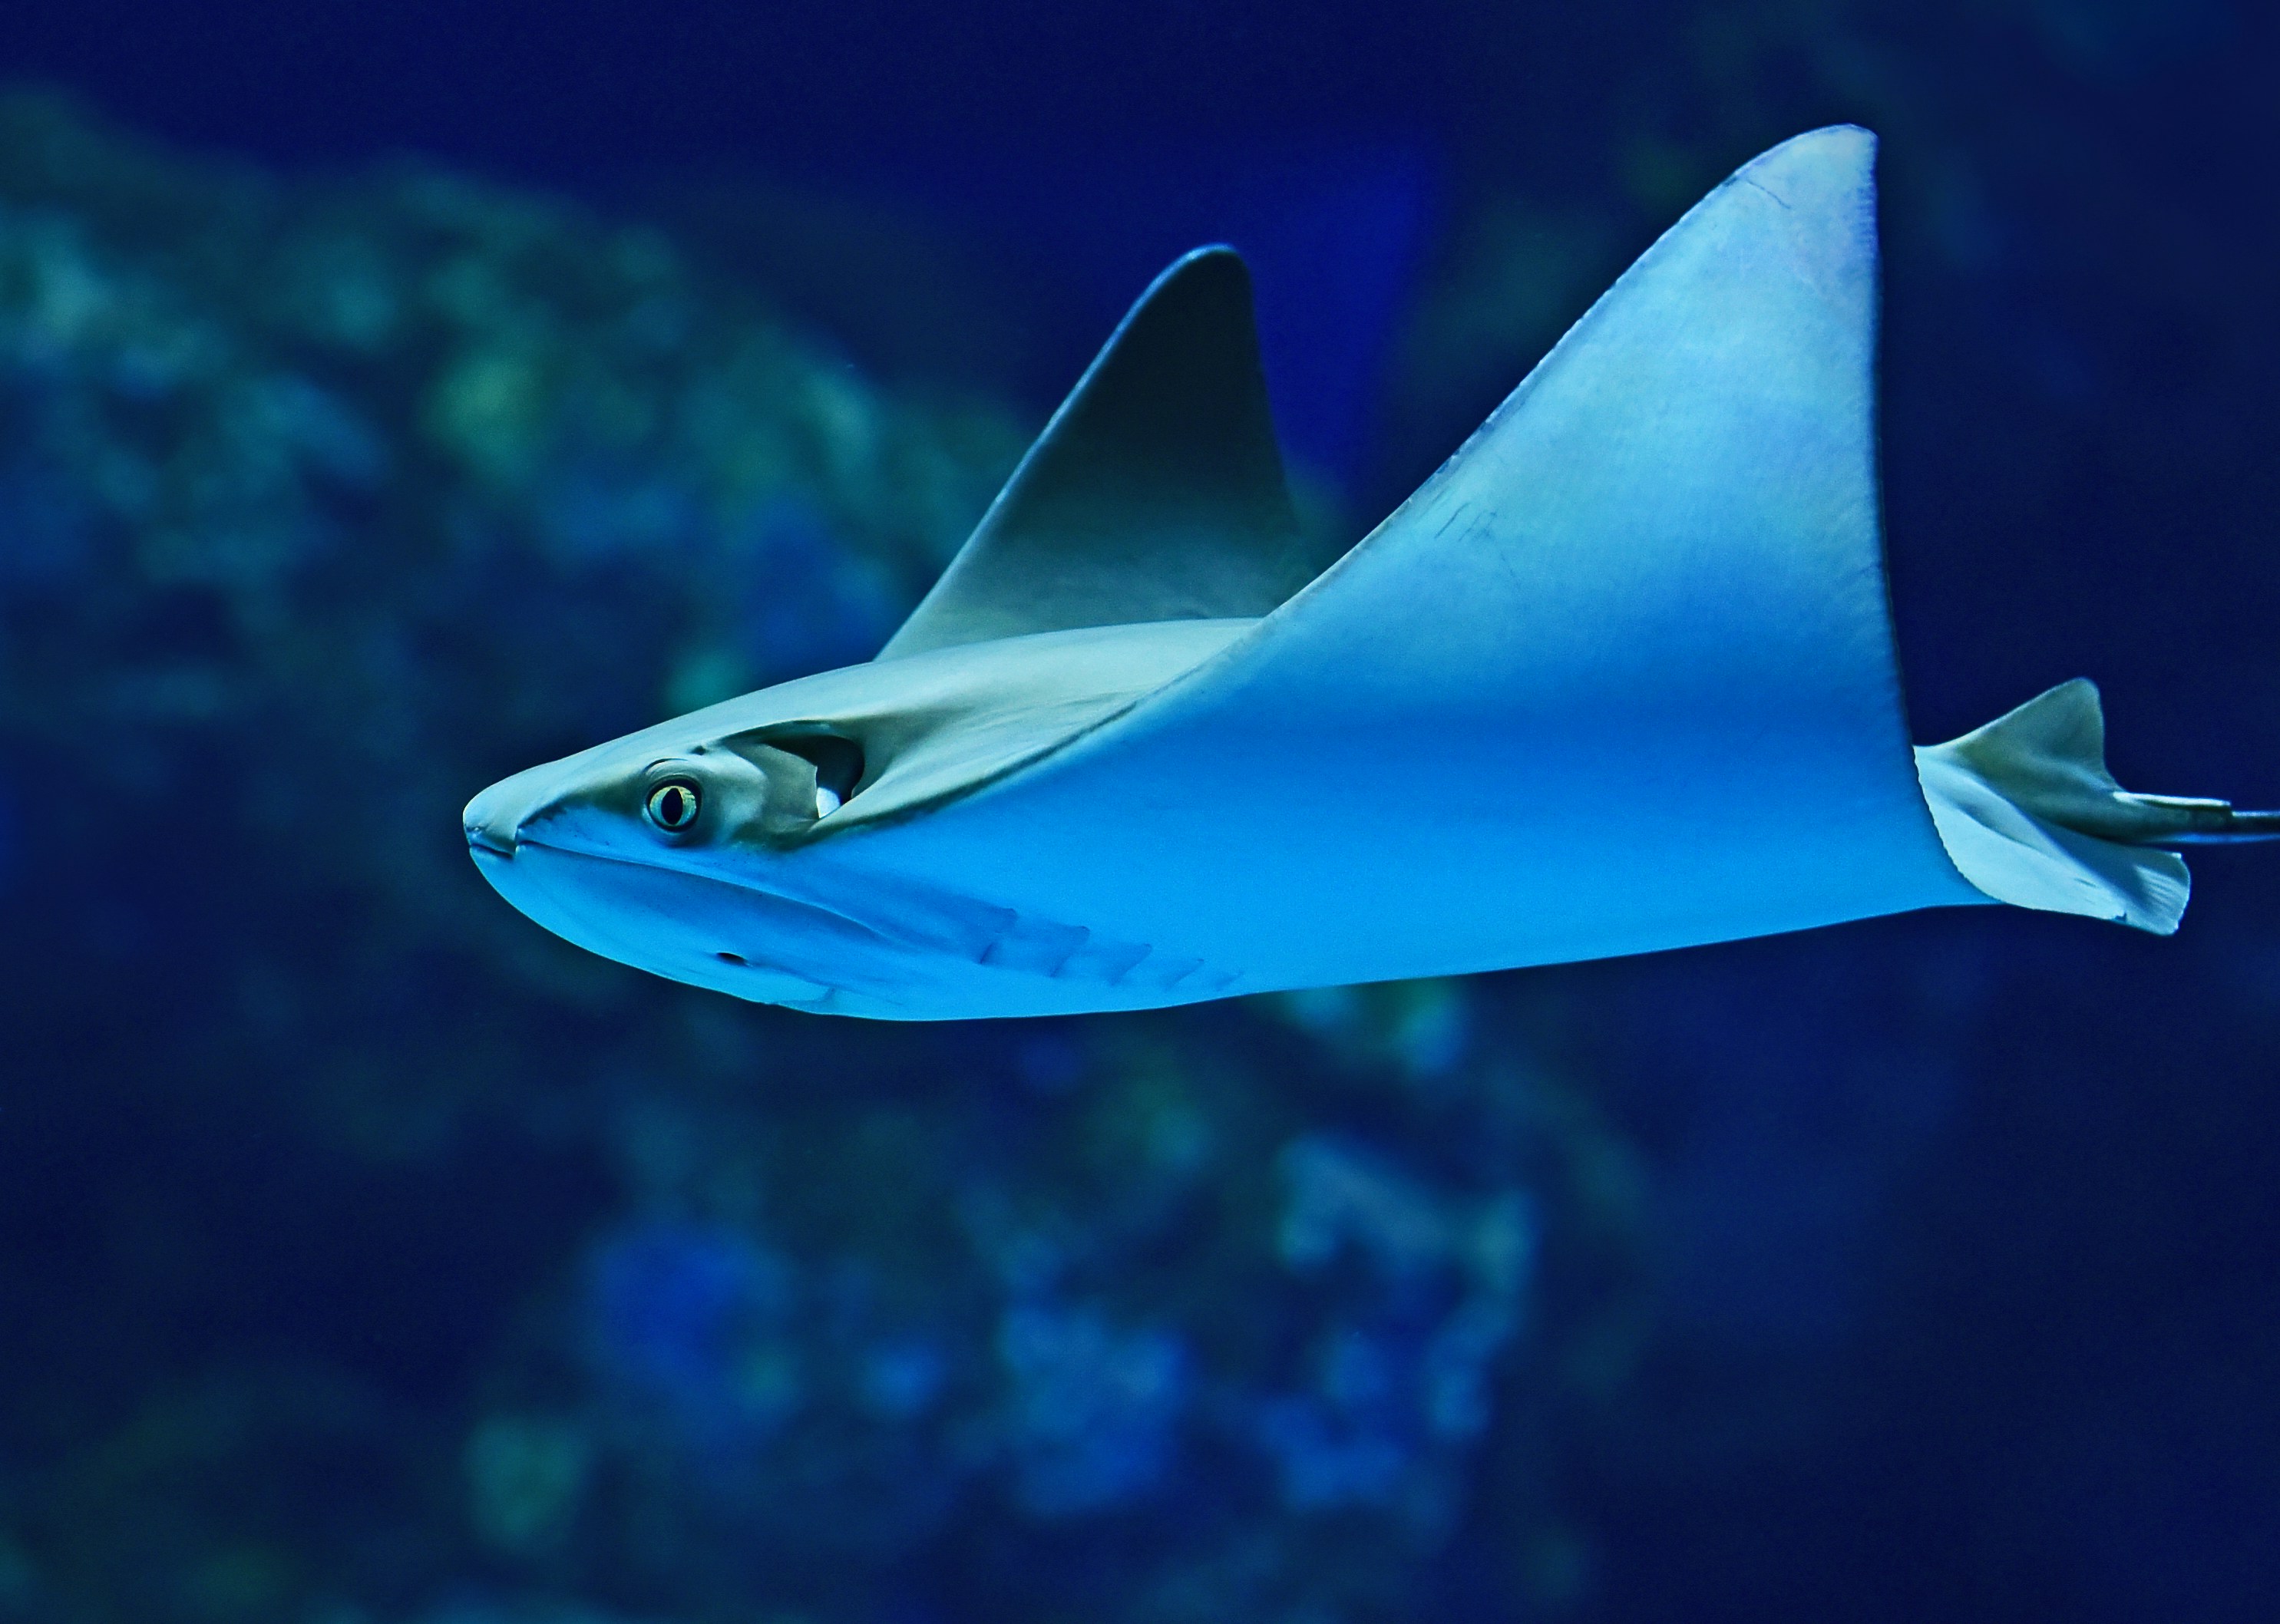 A cow nose ray swims past at the Cairns Aquarium. These fascinating and rather weird-looking rays are a type of eagle ray, and are found in the Western Atlantic Ocean from New England to Brazil.